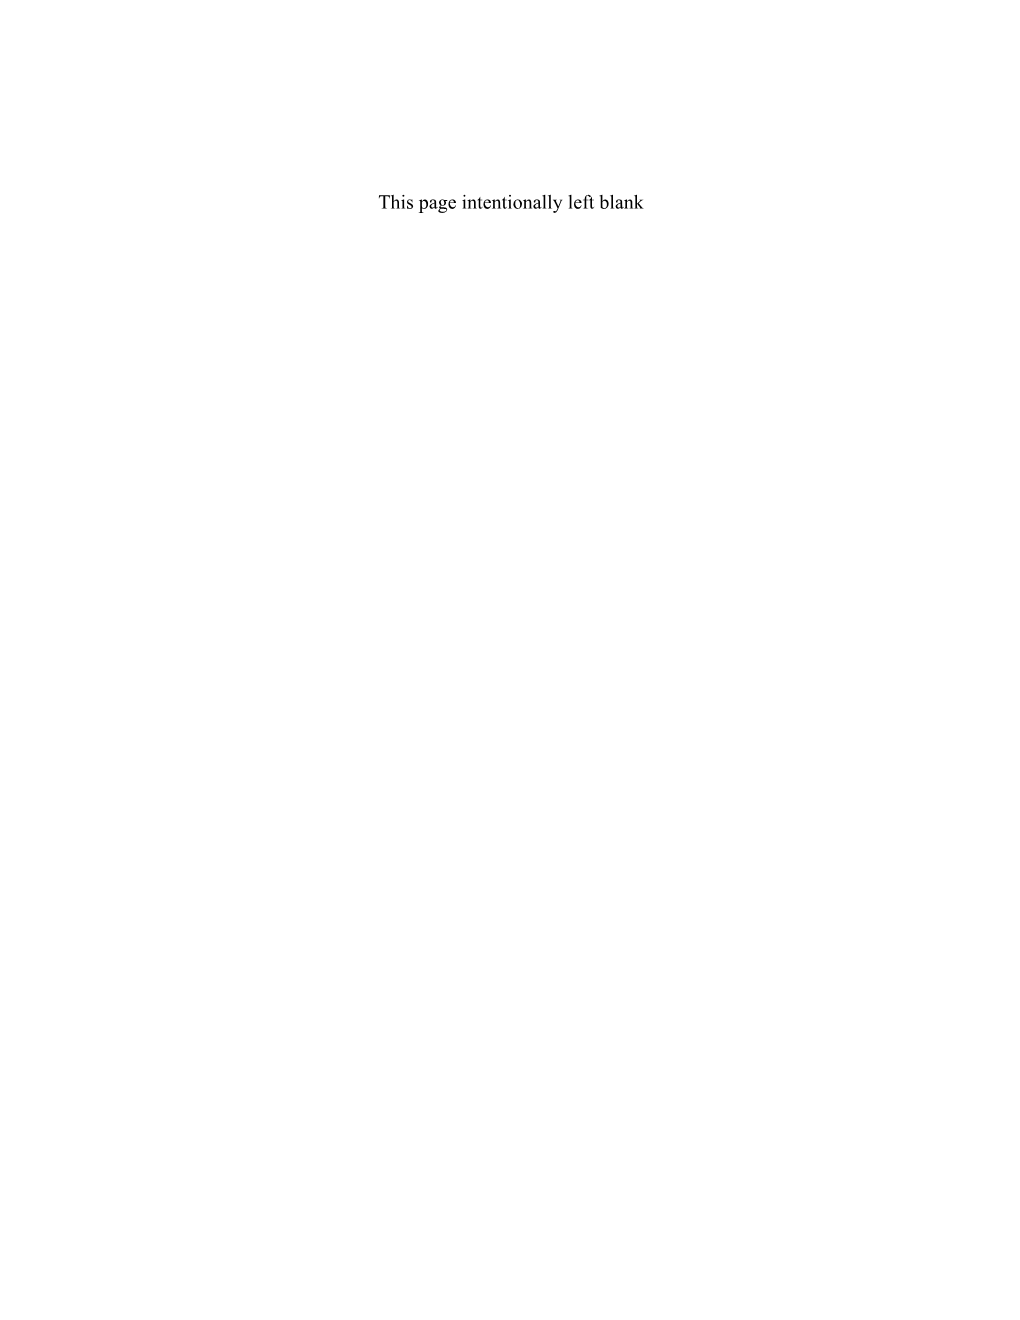 This Page Intentionally Left Blank JAN MATULKA: the UNKNOWN MODERNIST EXHIBITION (Jan Matulka: the Modernist)